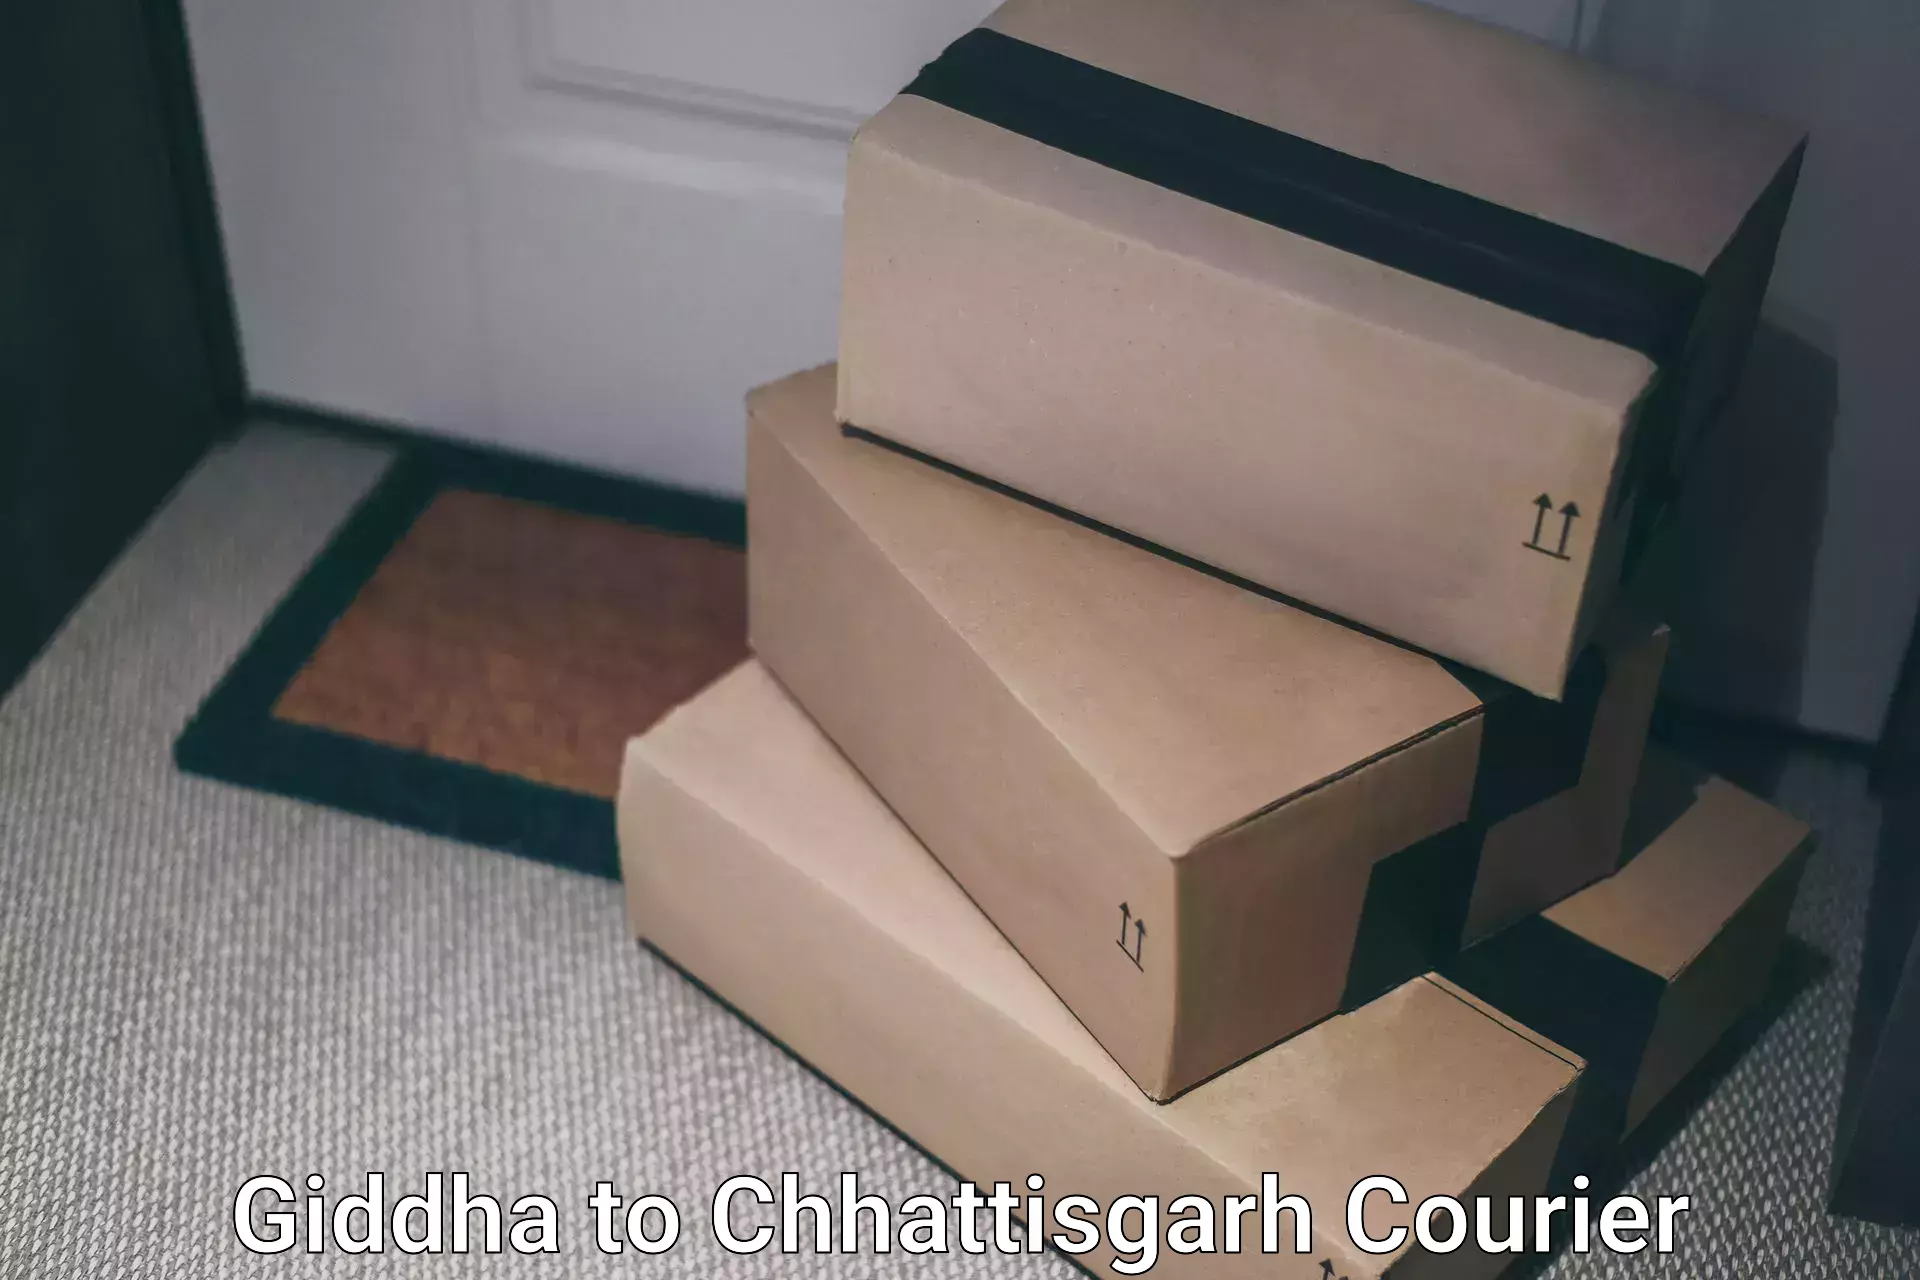 Courier service partnerships in Giddha to Dongargarh